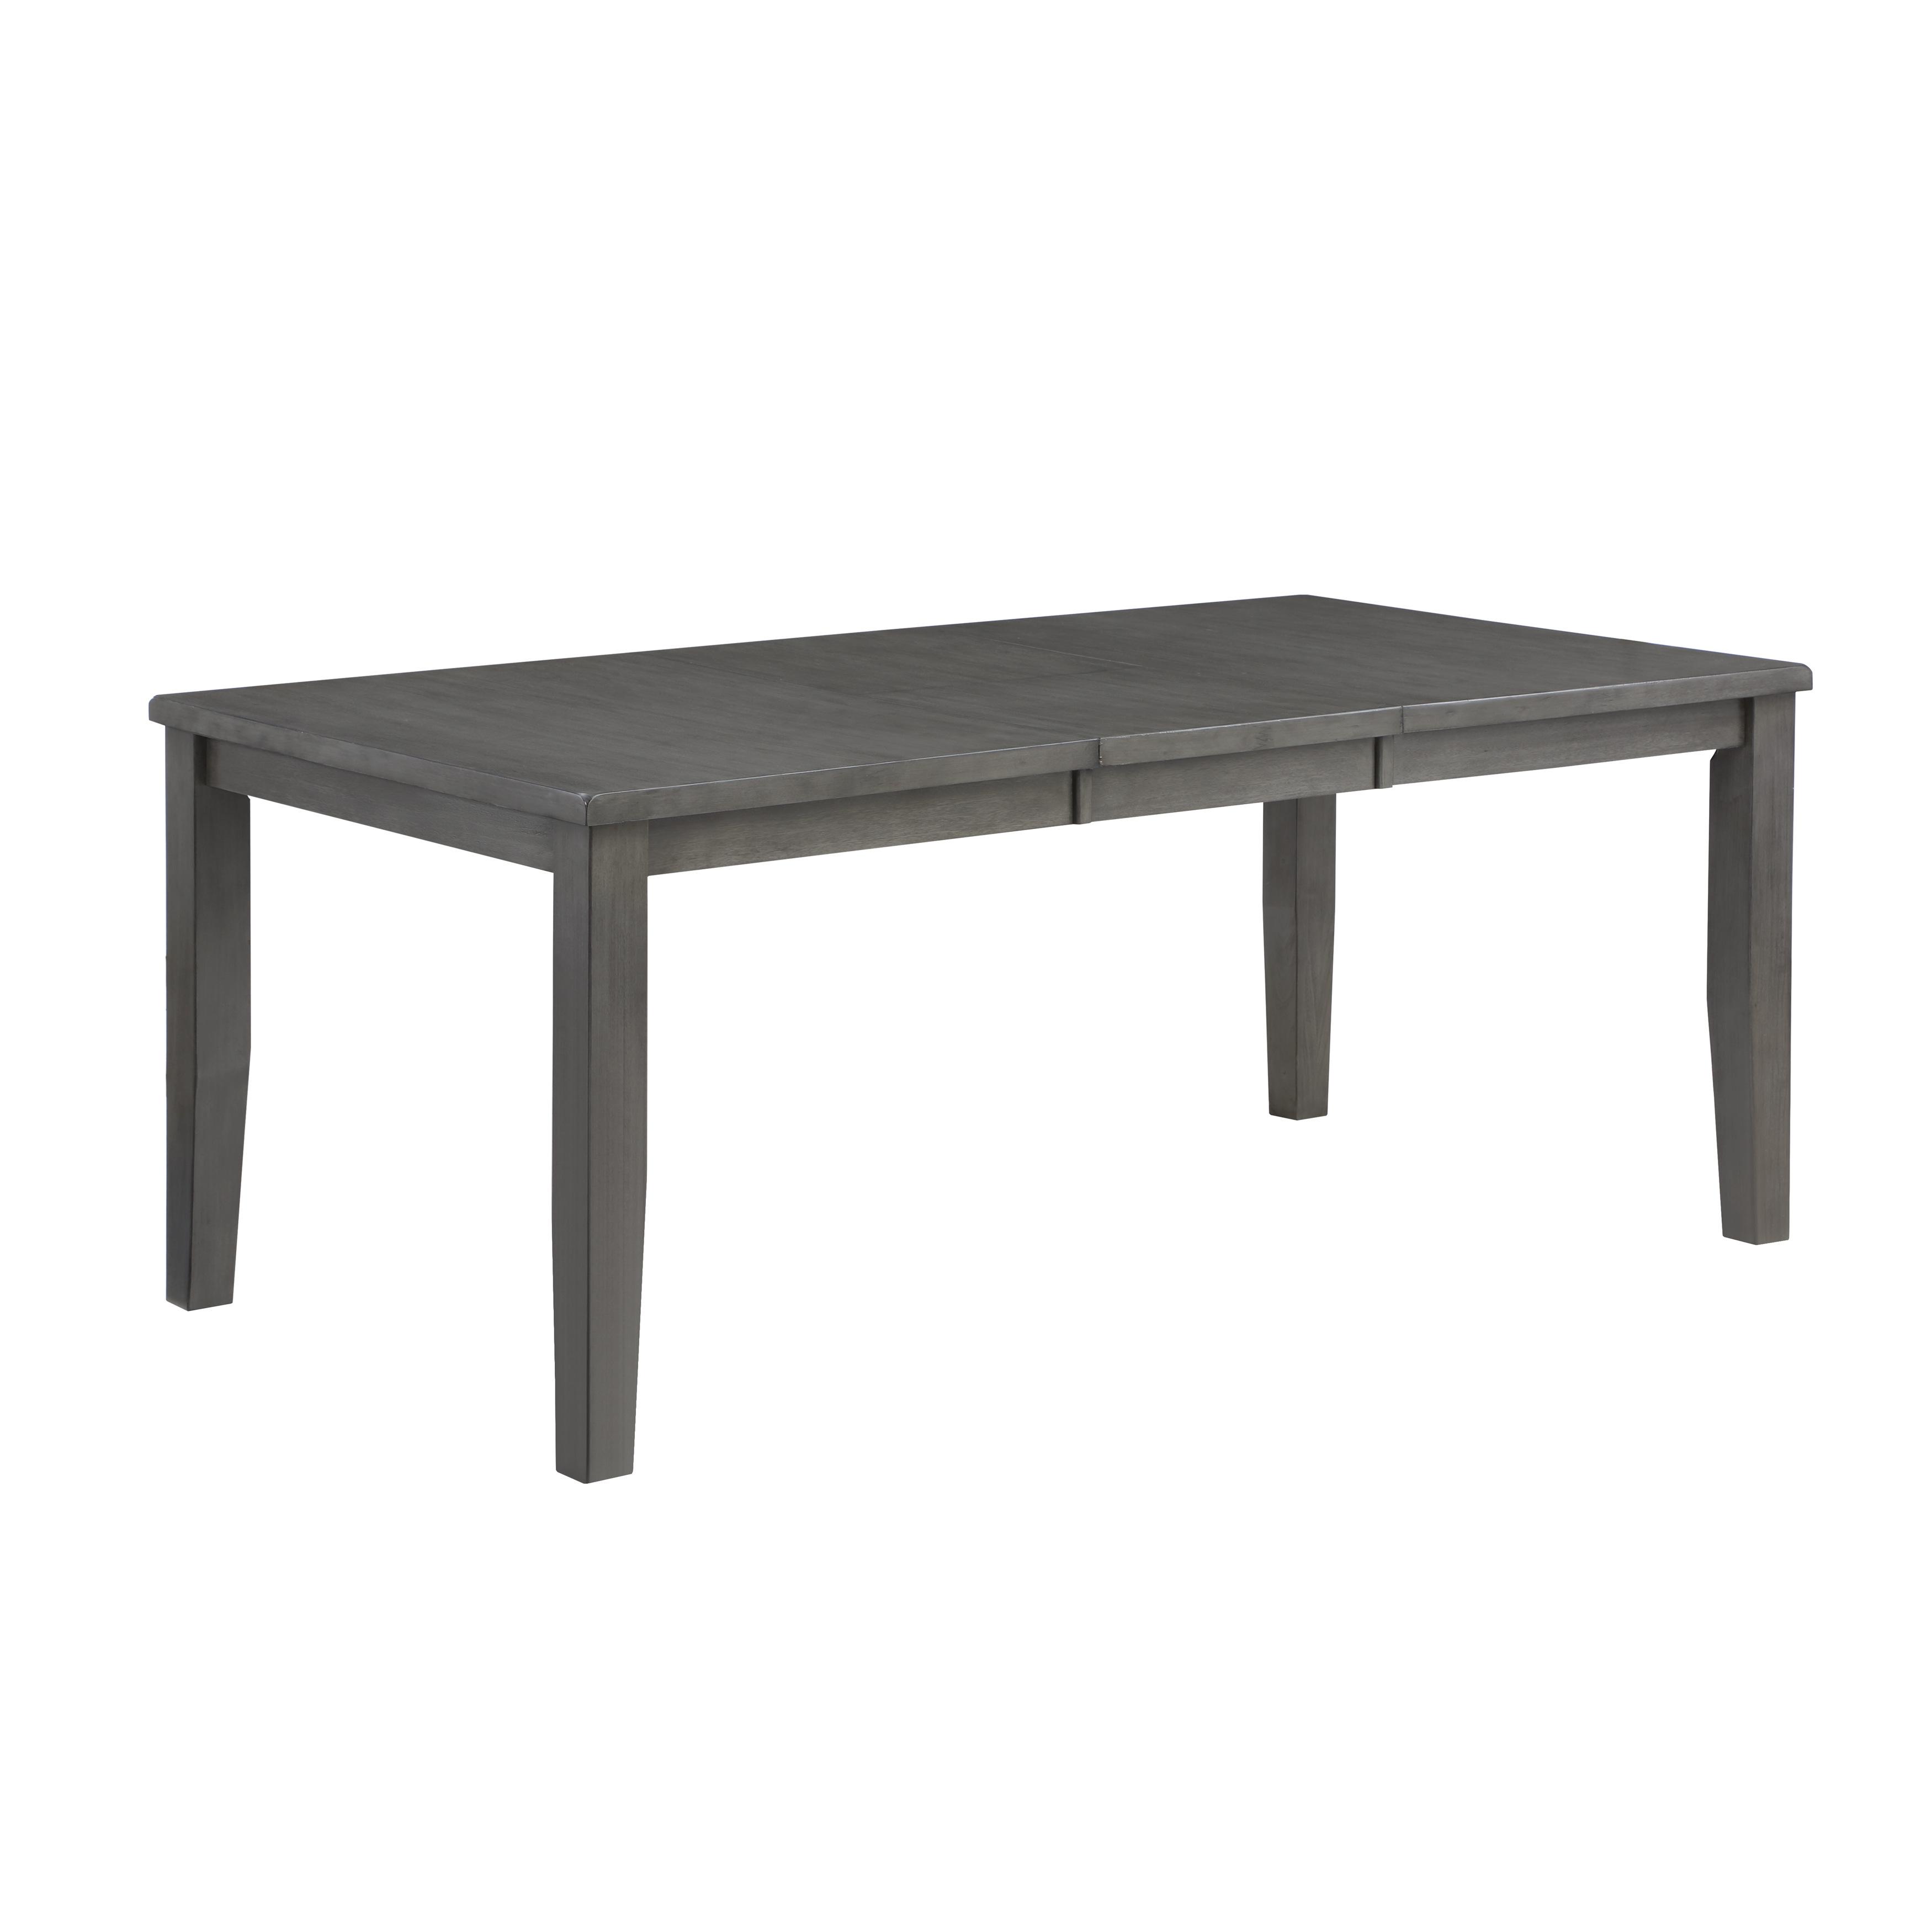 Transitional Dining Table 5567GY-72 Nashua 5567GY-72 in Gray 